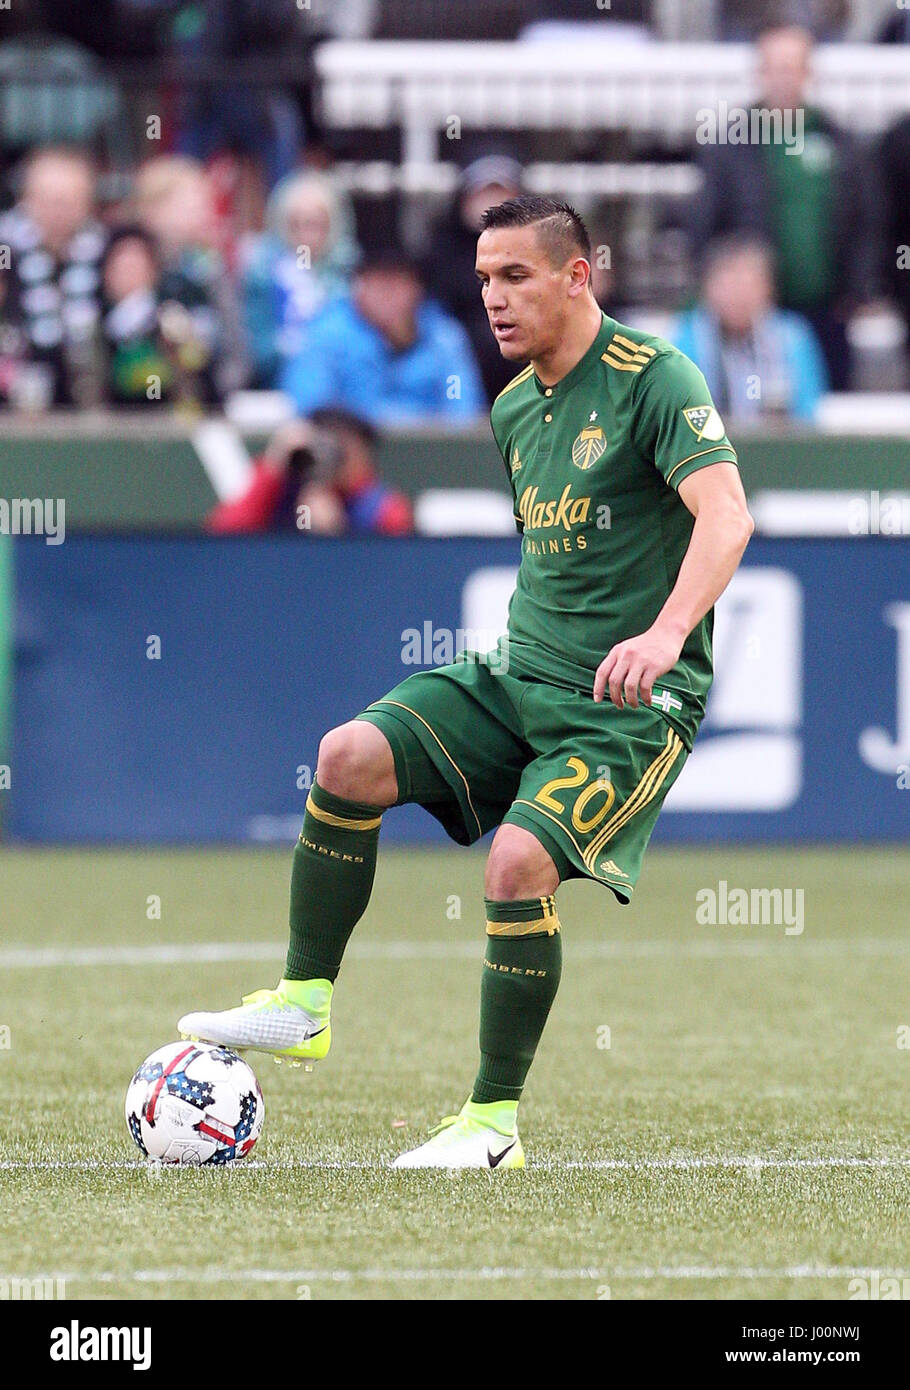 April 02, 2017. Portland Timbers midfielder David Guzman (20) in action during the MLS match between the visiting New England Revolution and the Portland Timbers at Providence Park, Portland, OR. Larry C. Lawson/CSM Stock Photo